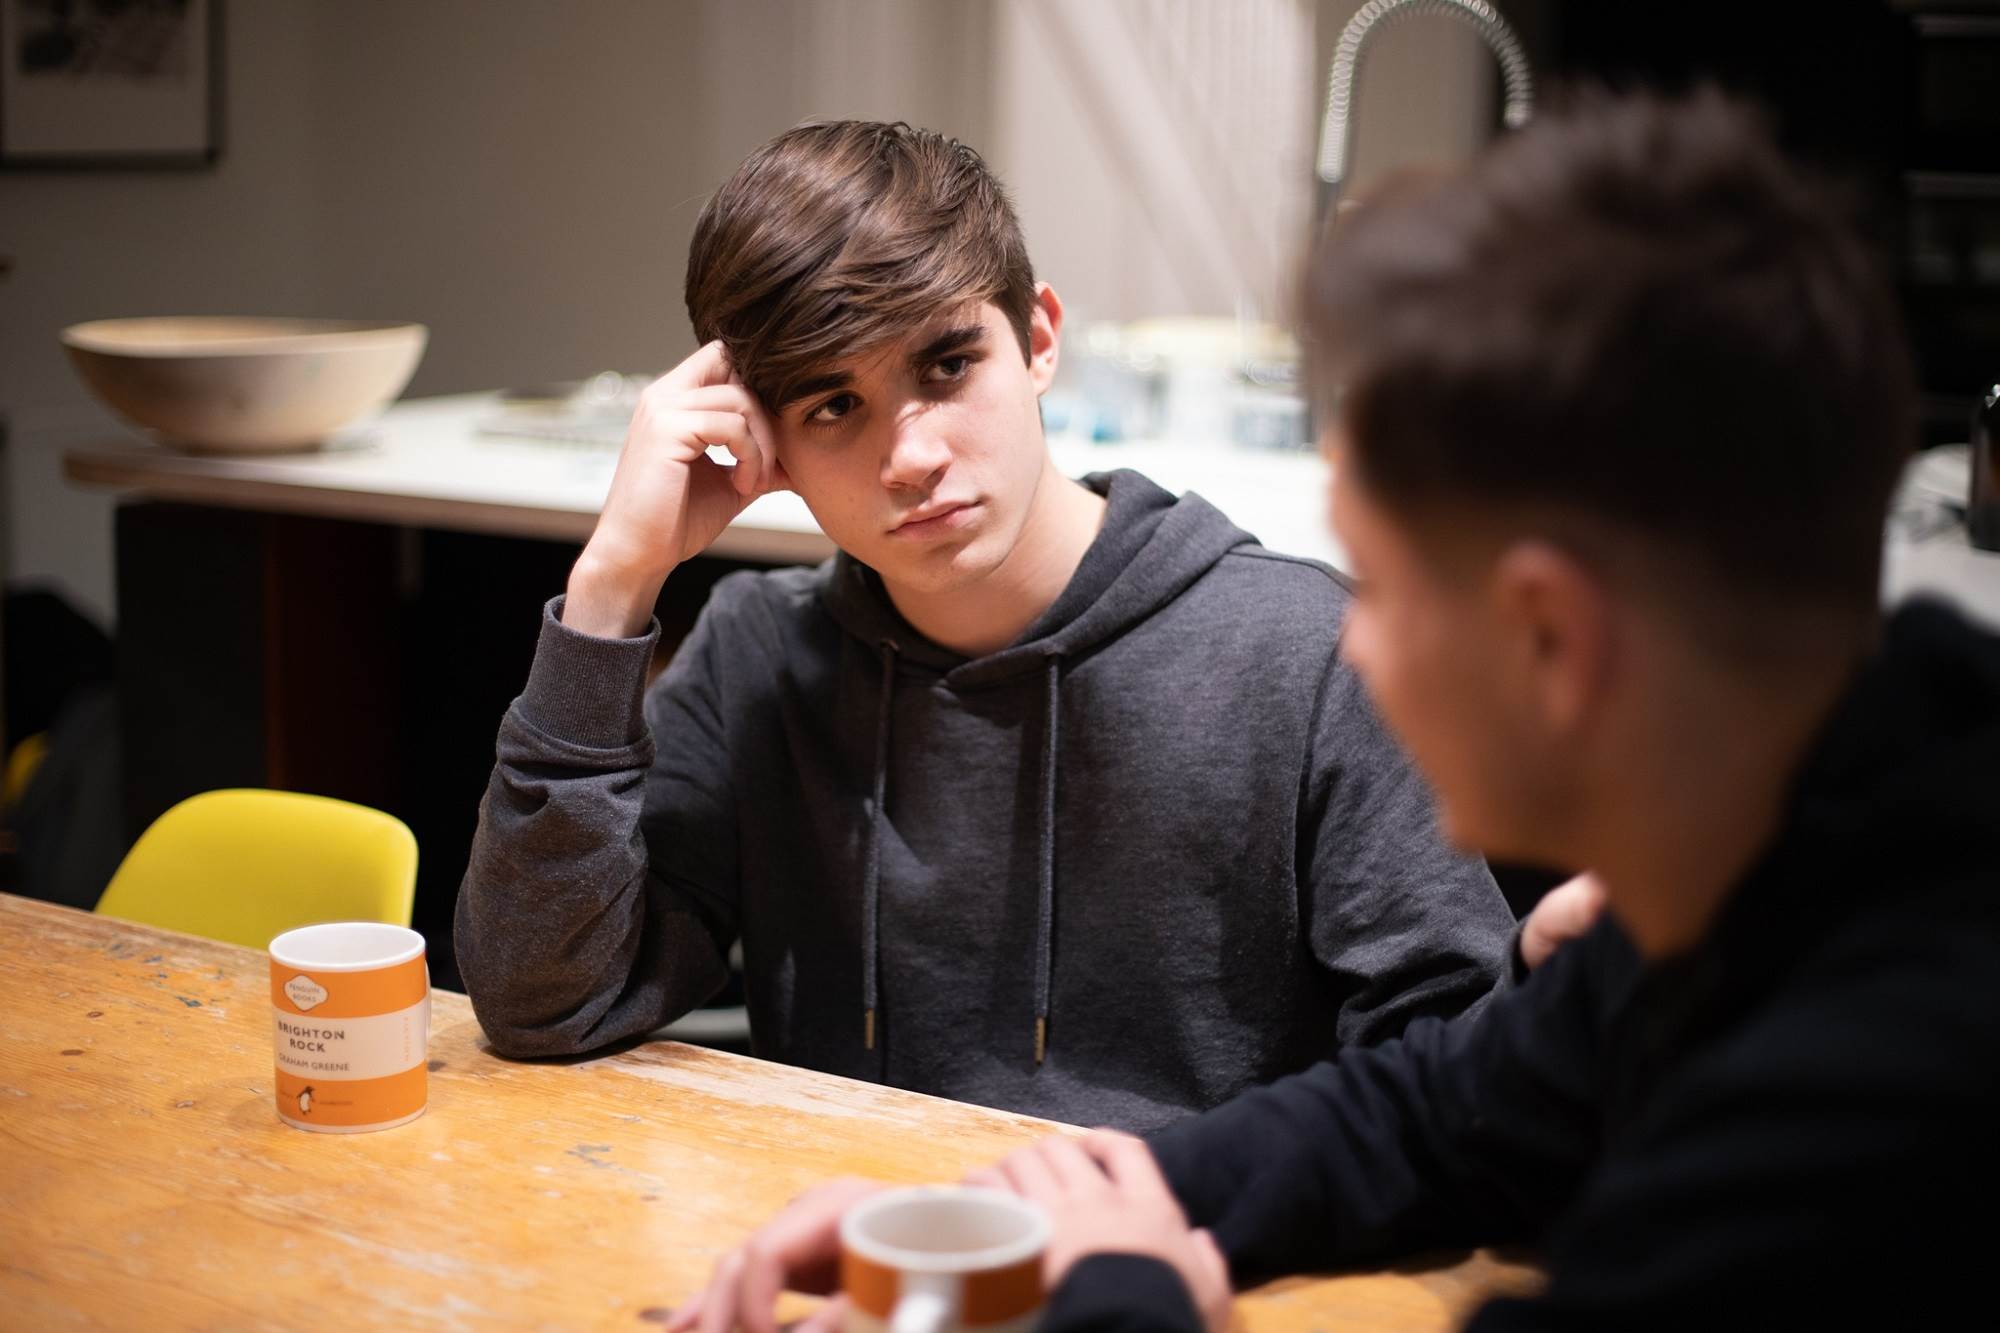 Teen Boy Listening To Other Teen Boy Supportively Looking Serious